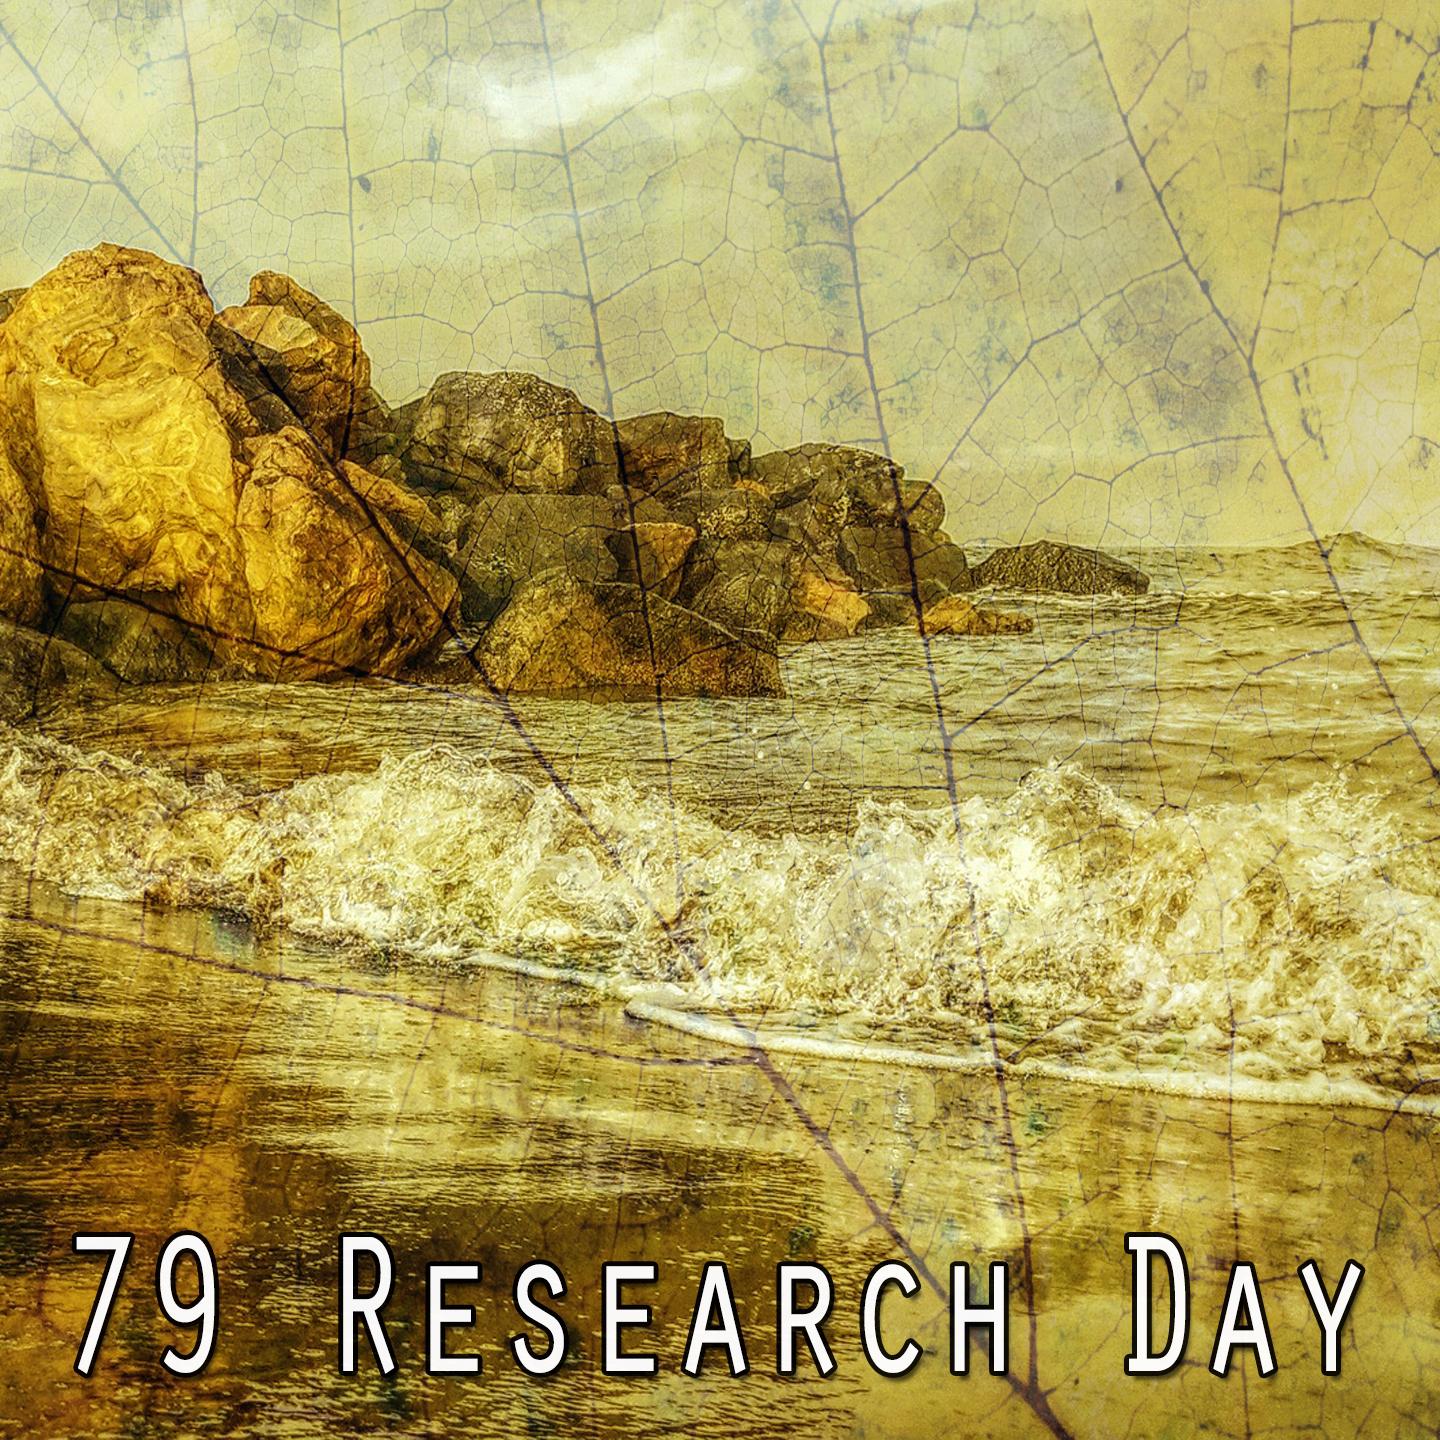 79 Research Day